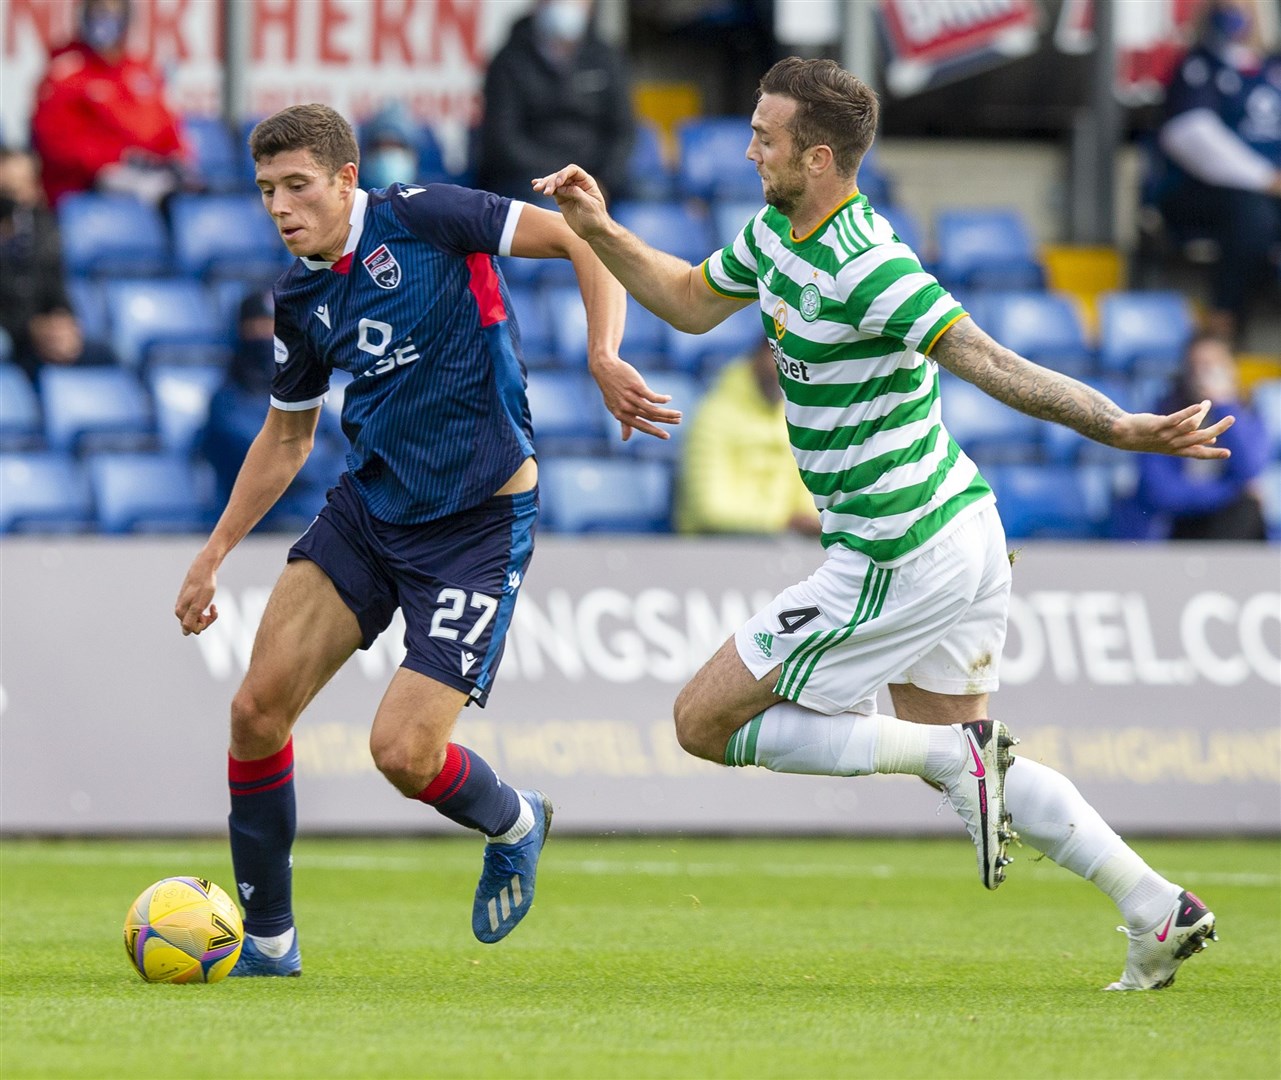 Ross Stewart has not yet scored from open play this season, but the Staggies will be relying on that changing soon.